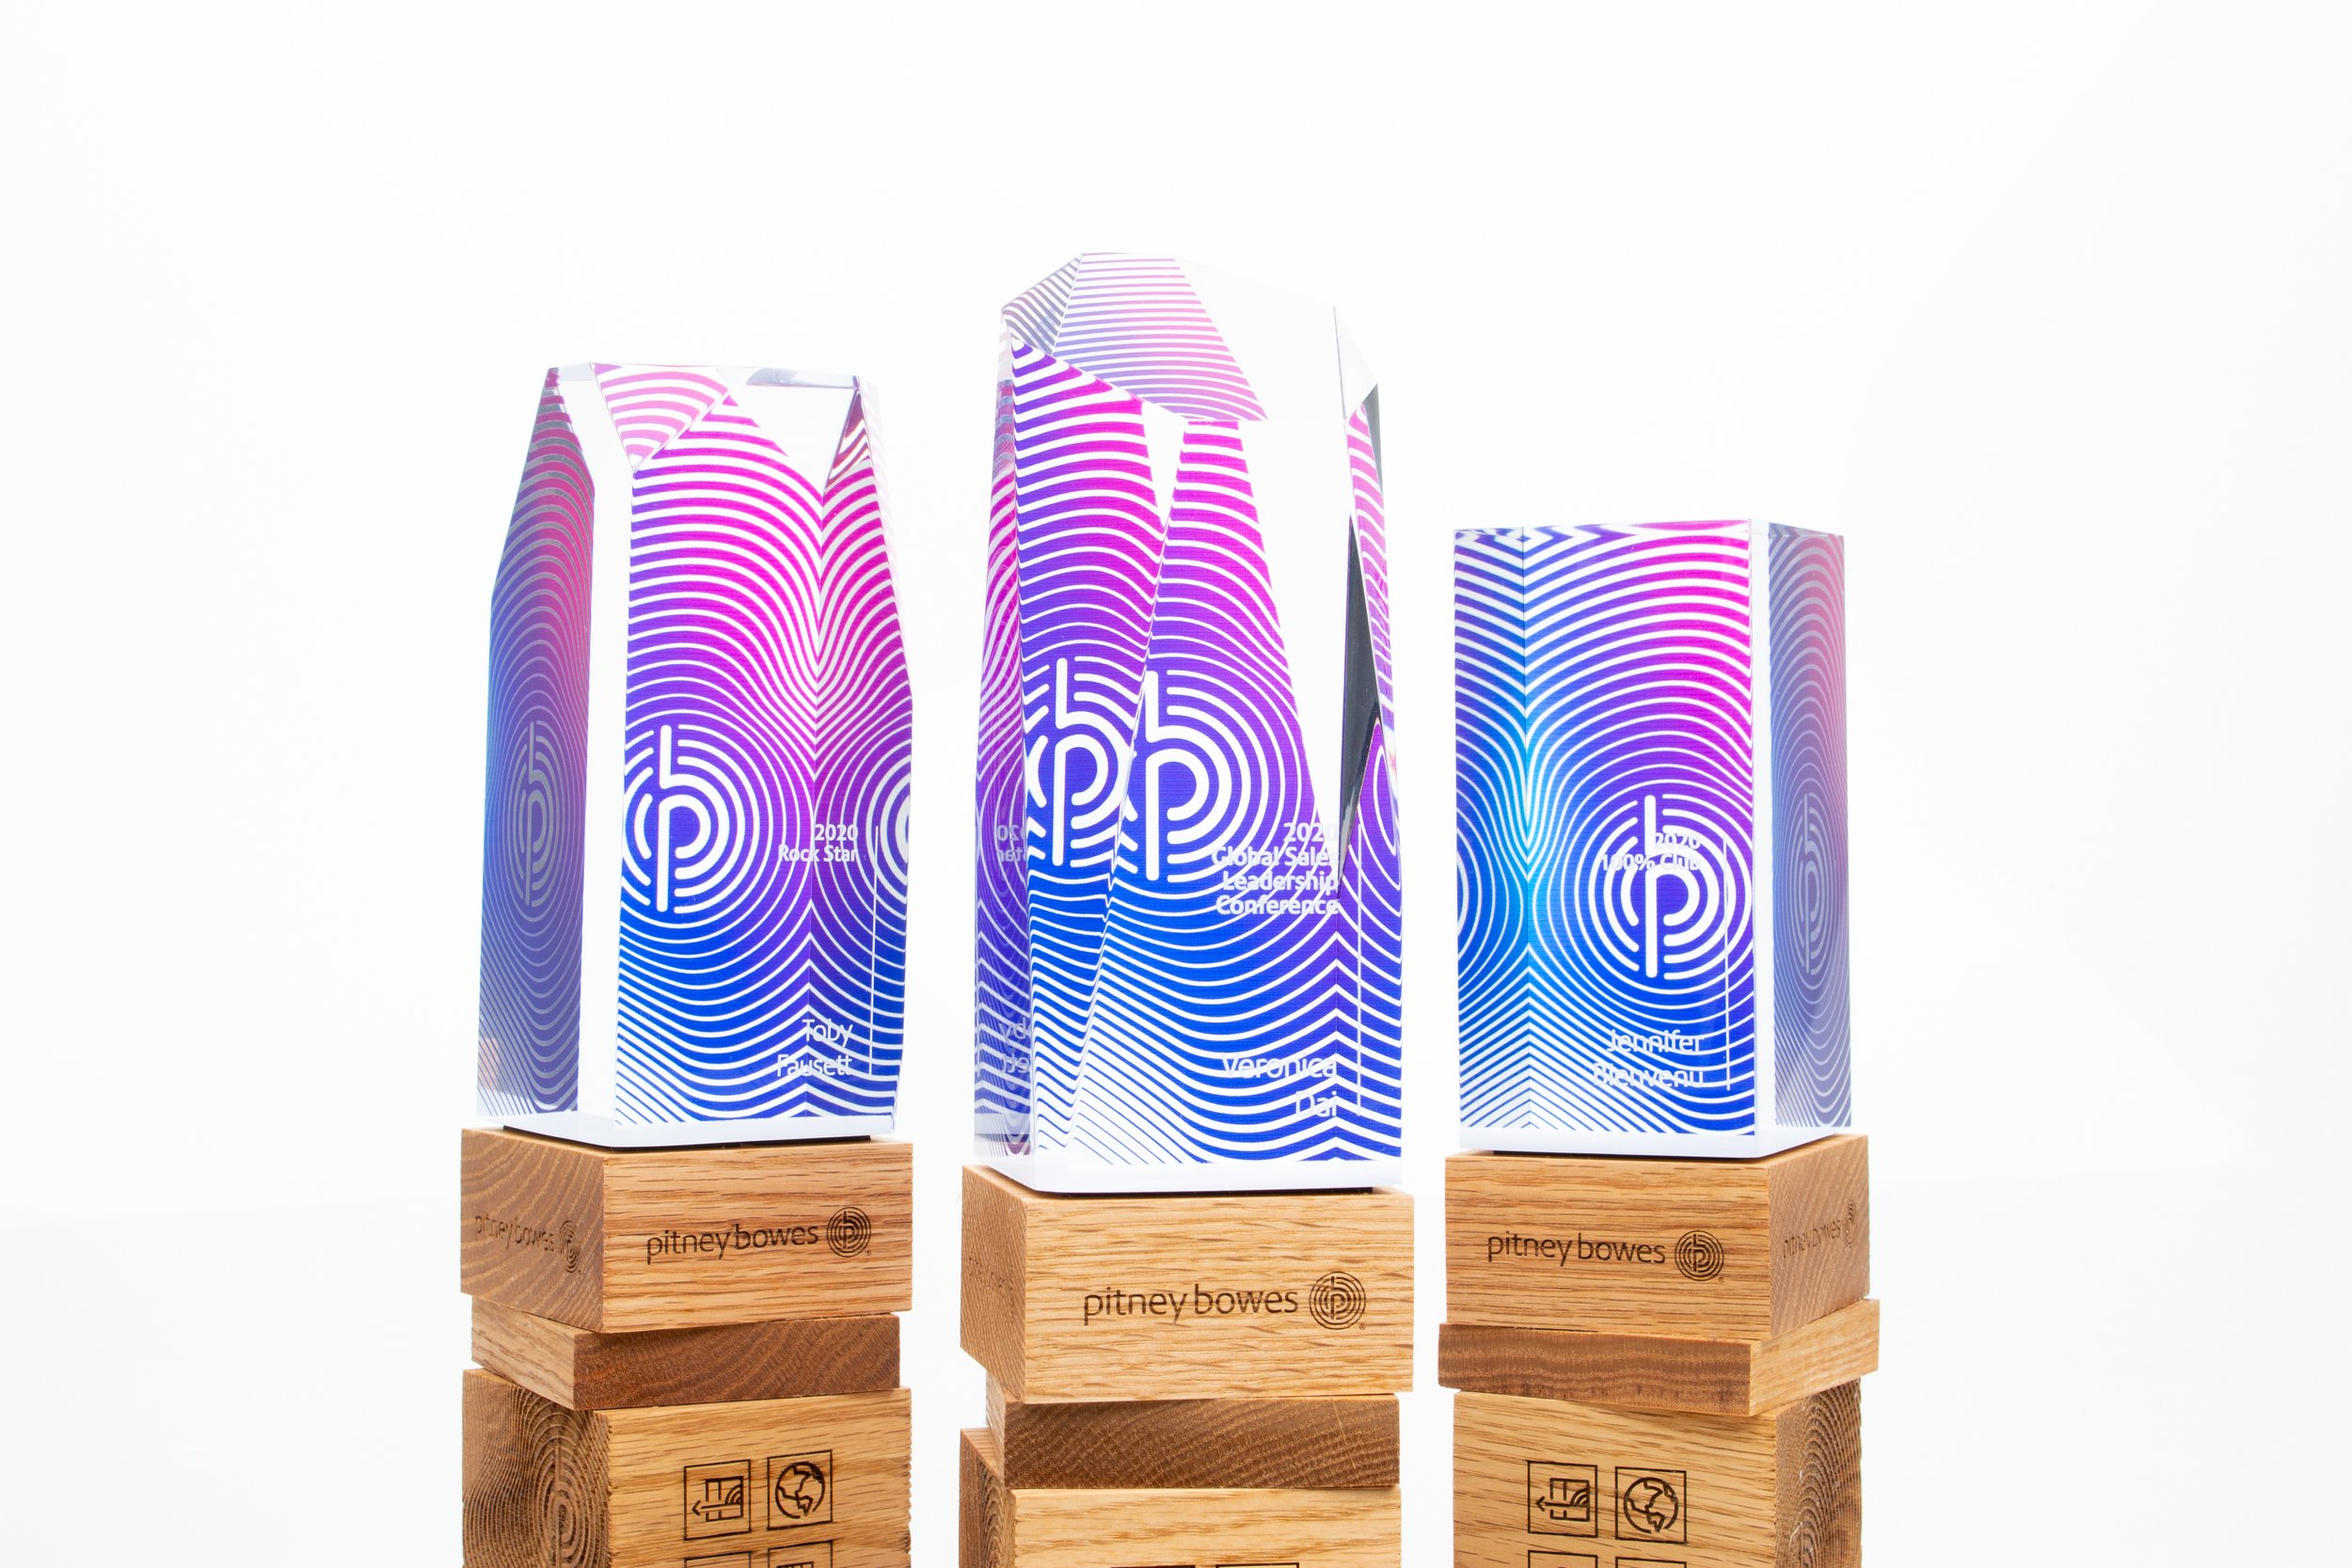 pitney-bowes-custom-awards-wooden-mix-materials 